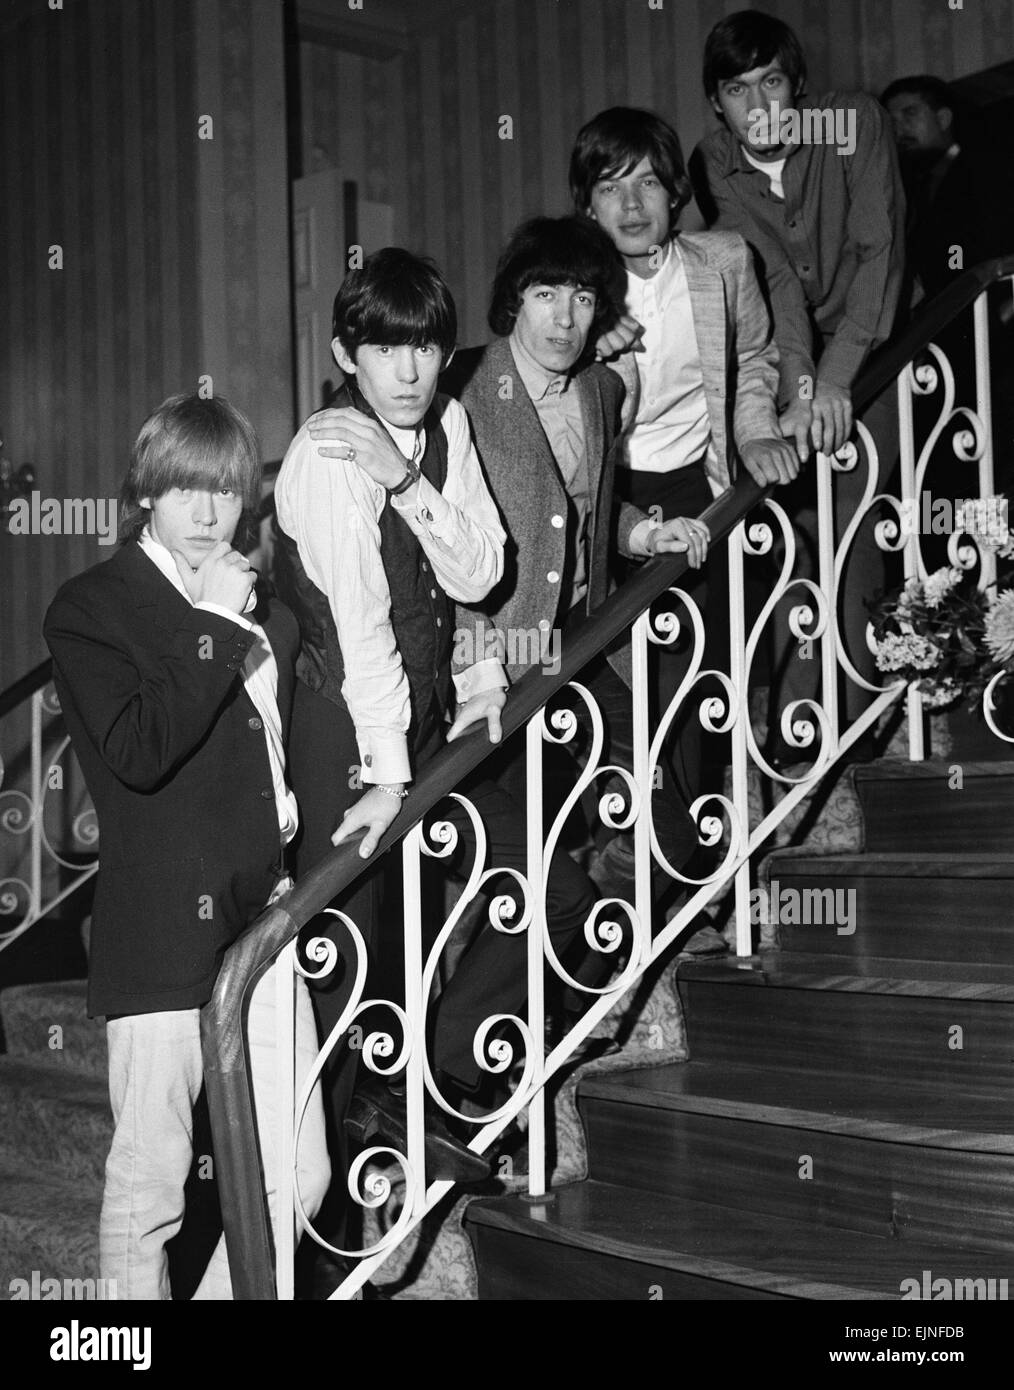 The Rolling Stones at The Imperial Ballroom Nelson, Lancashire l-r Brian Jones, Keith Richards, Bill Wyman, Mick Jagger and Charlie Watts. 25th July 1964 Stock Photo